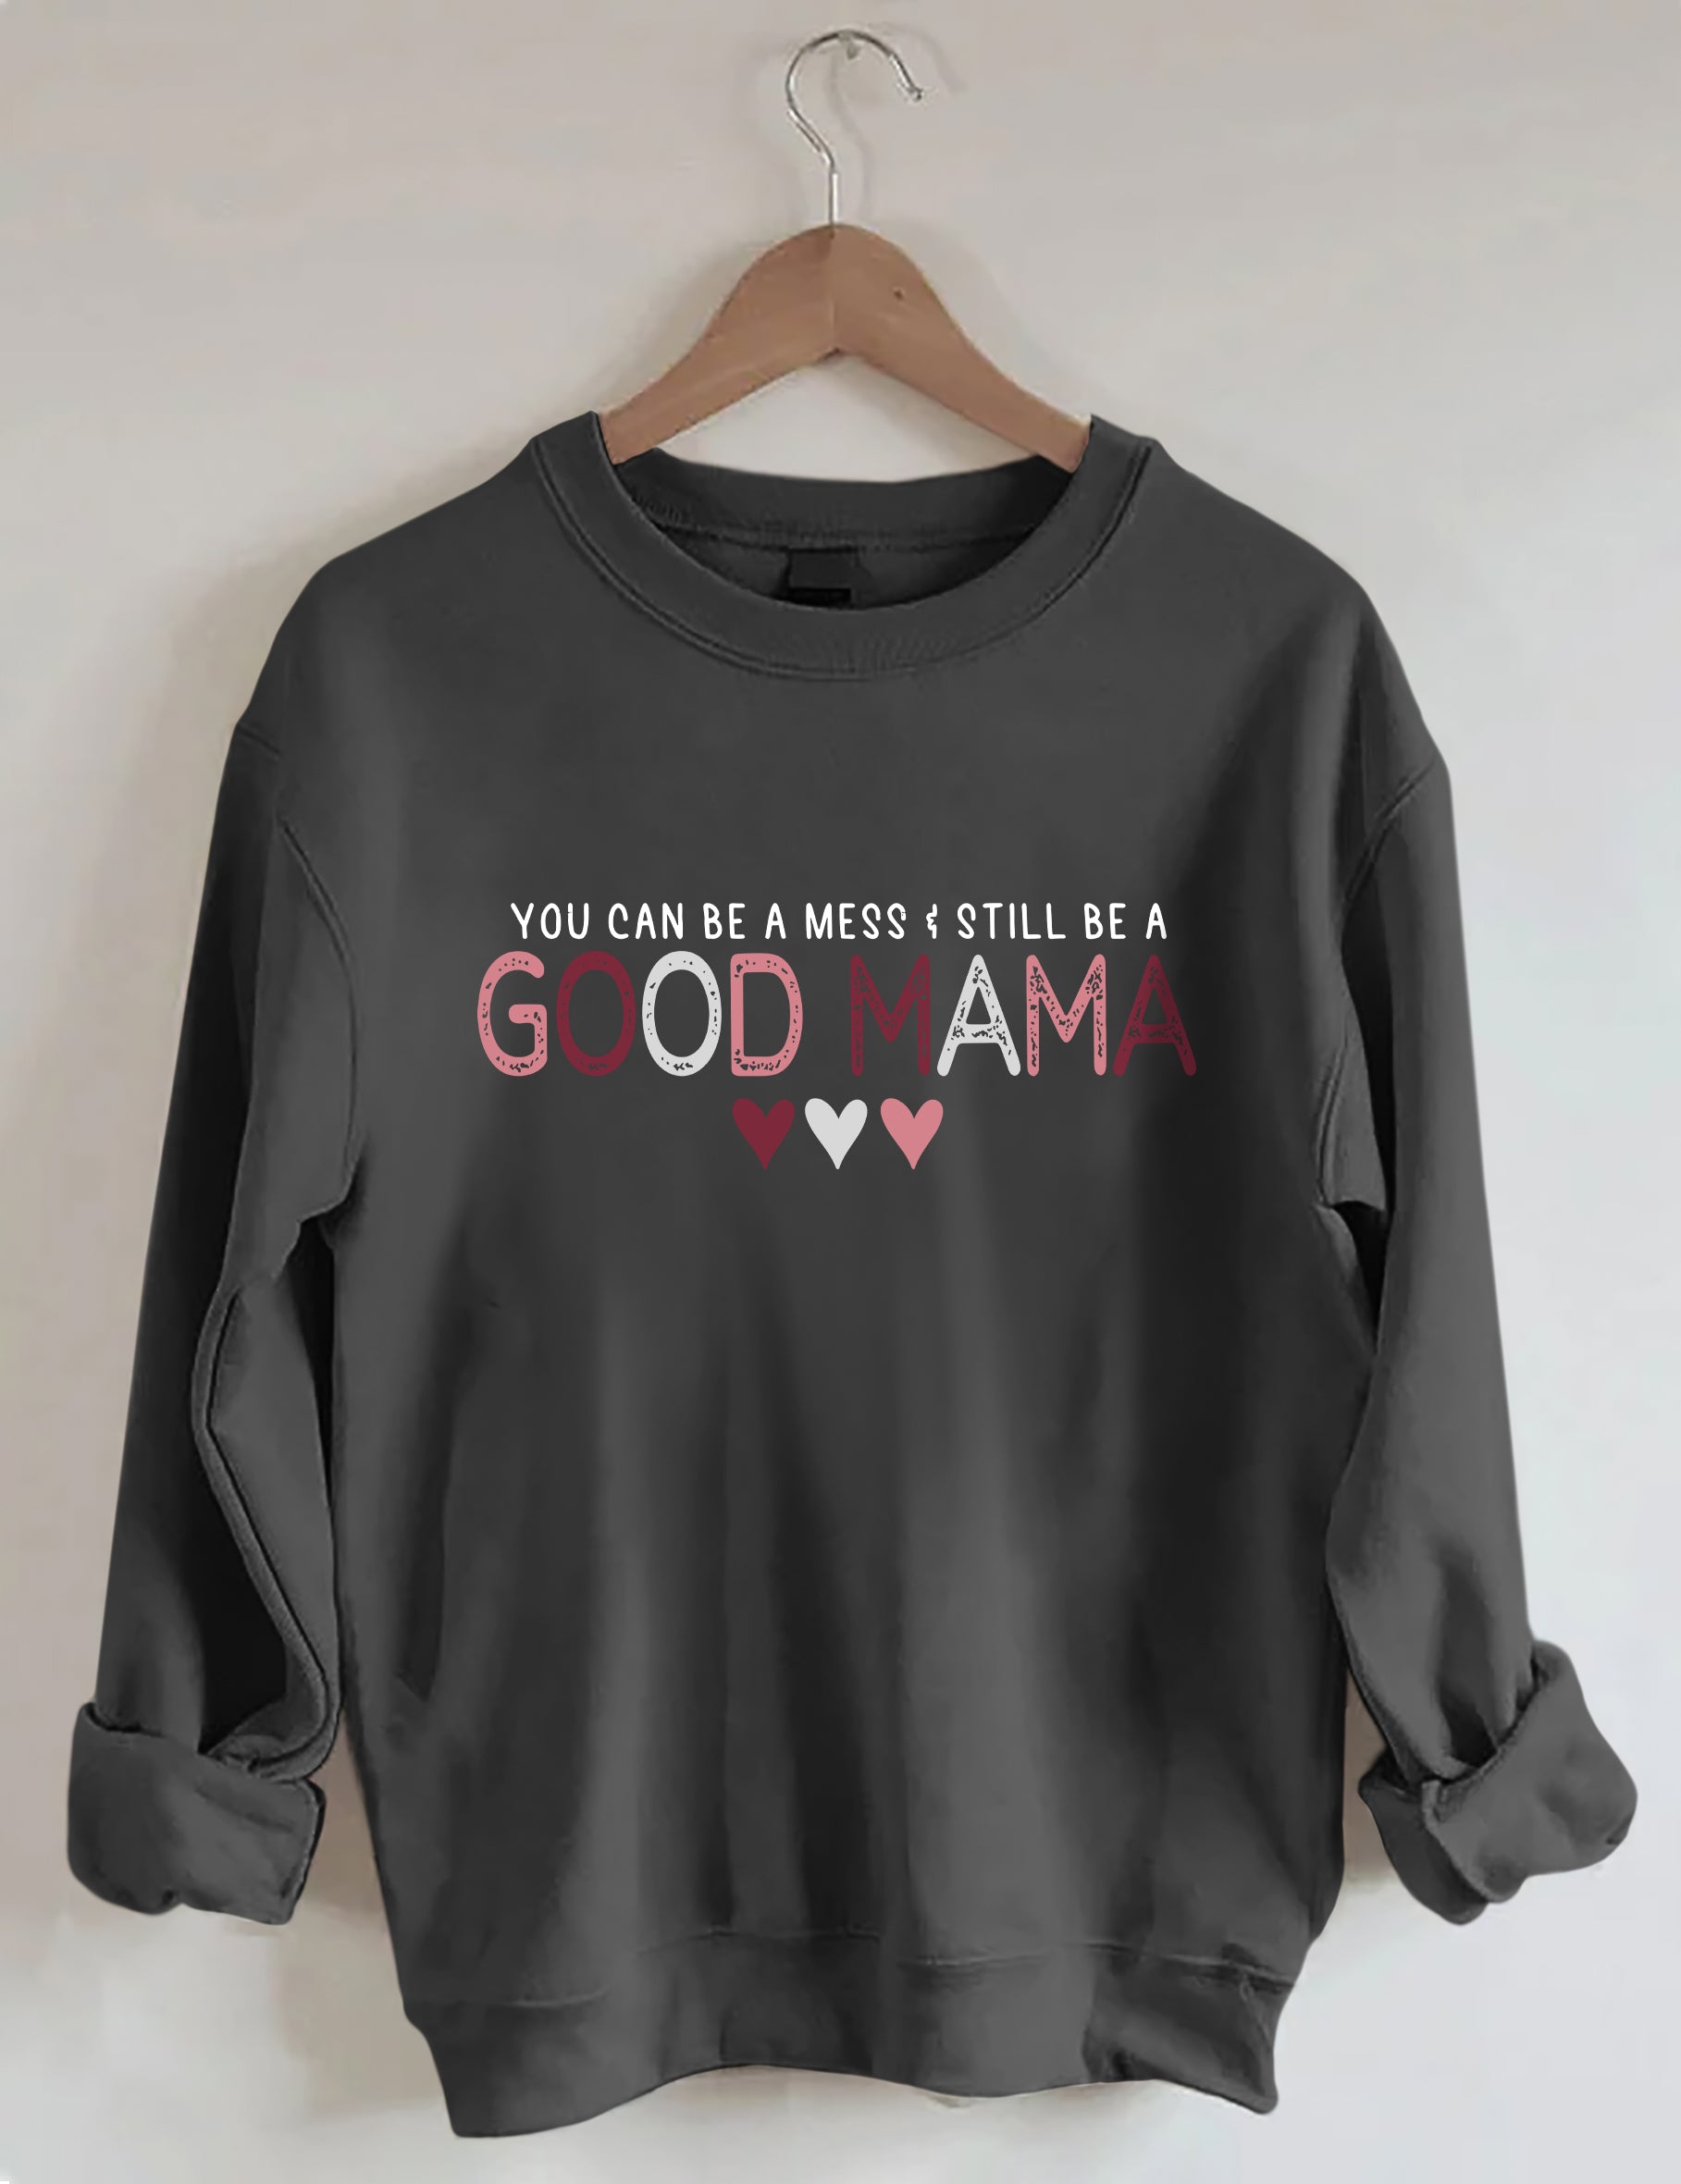 You Can Be A Mess & Still Be A Good Mama Sweatshirt